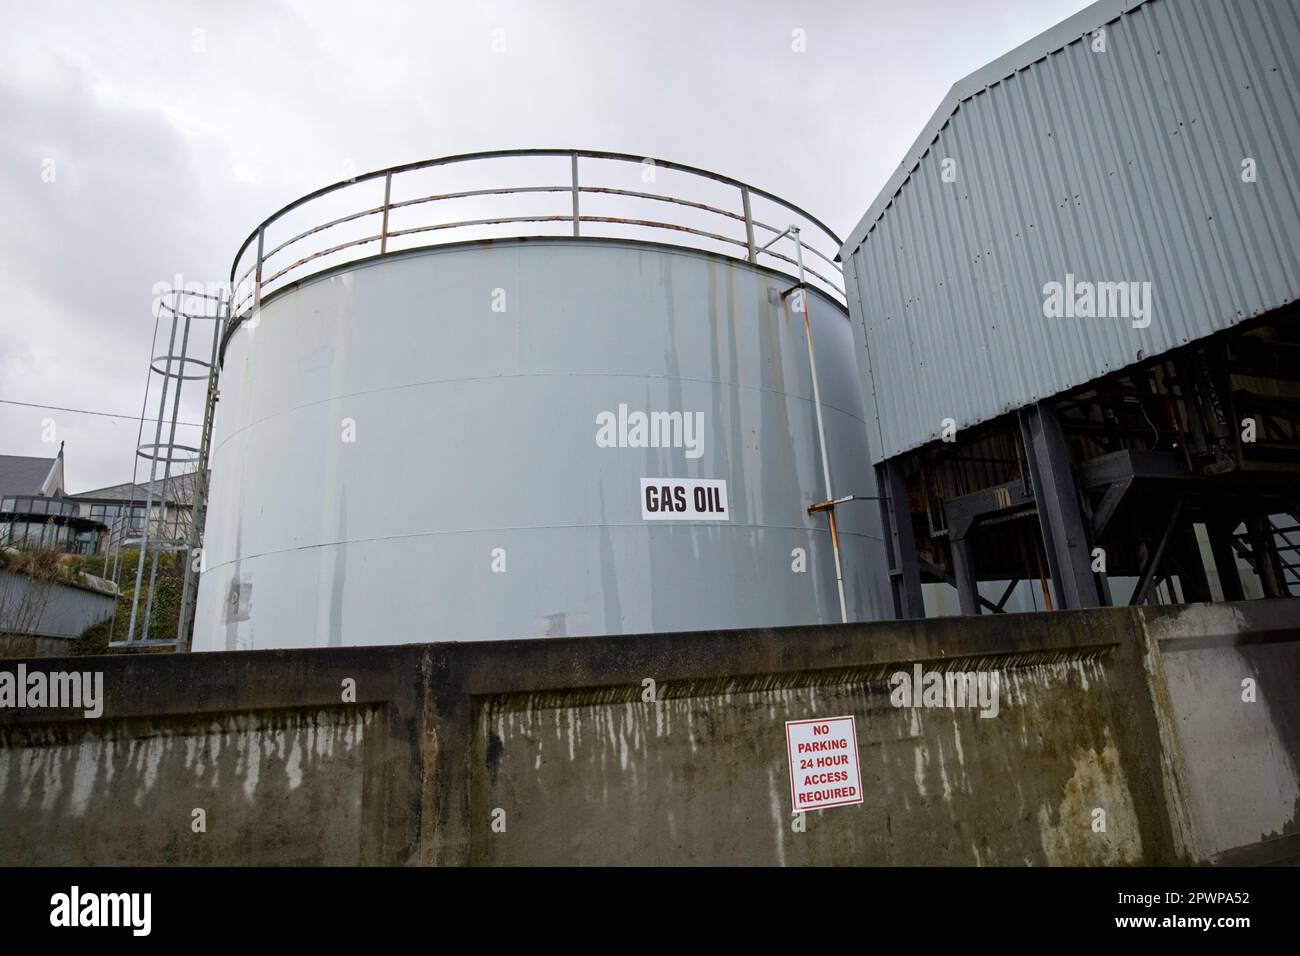 donegal oil company gas oil storage tank killybegs harbour county donegal republic of ireland Stock Photo